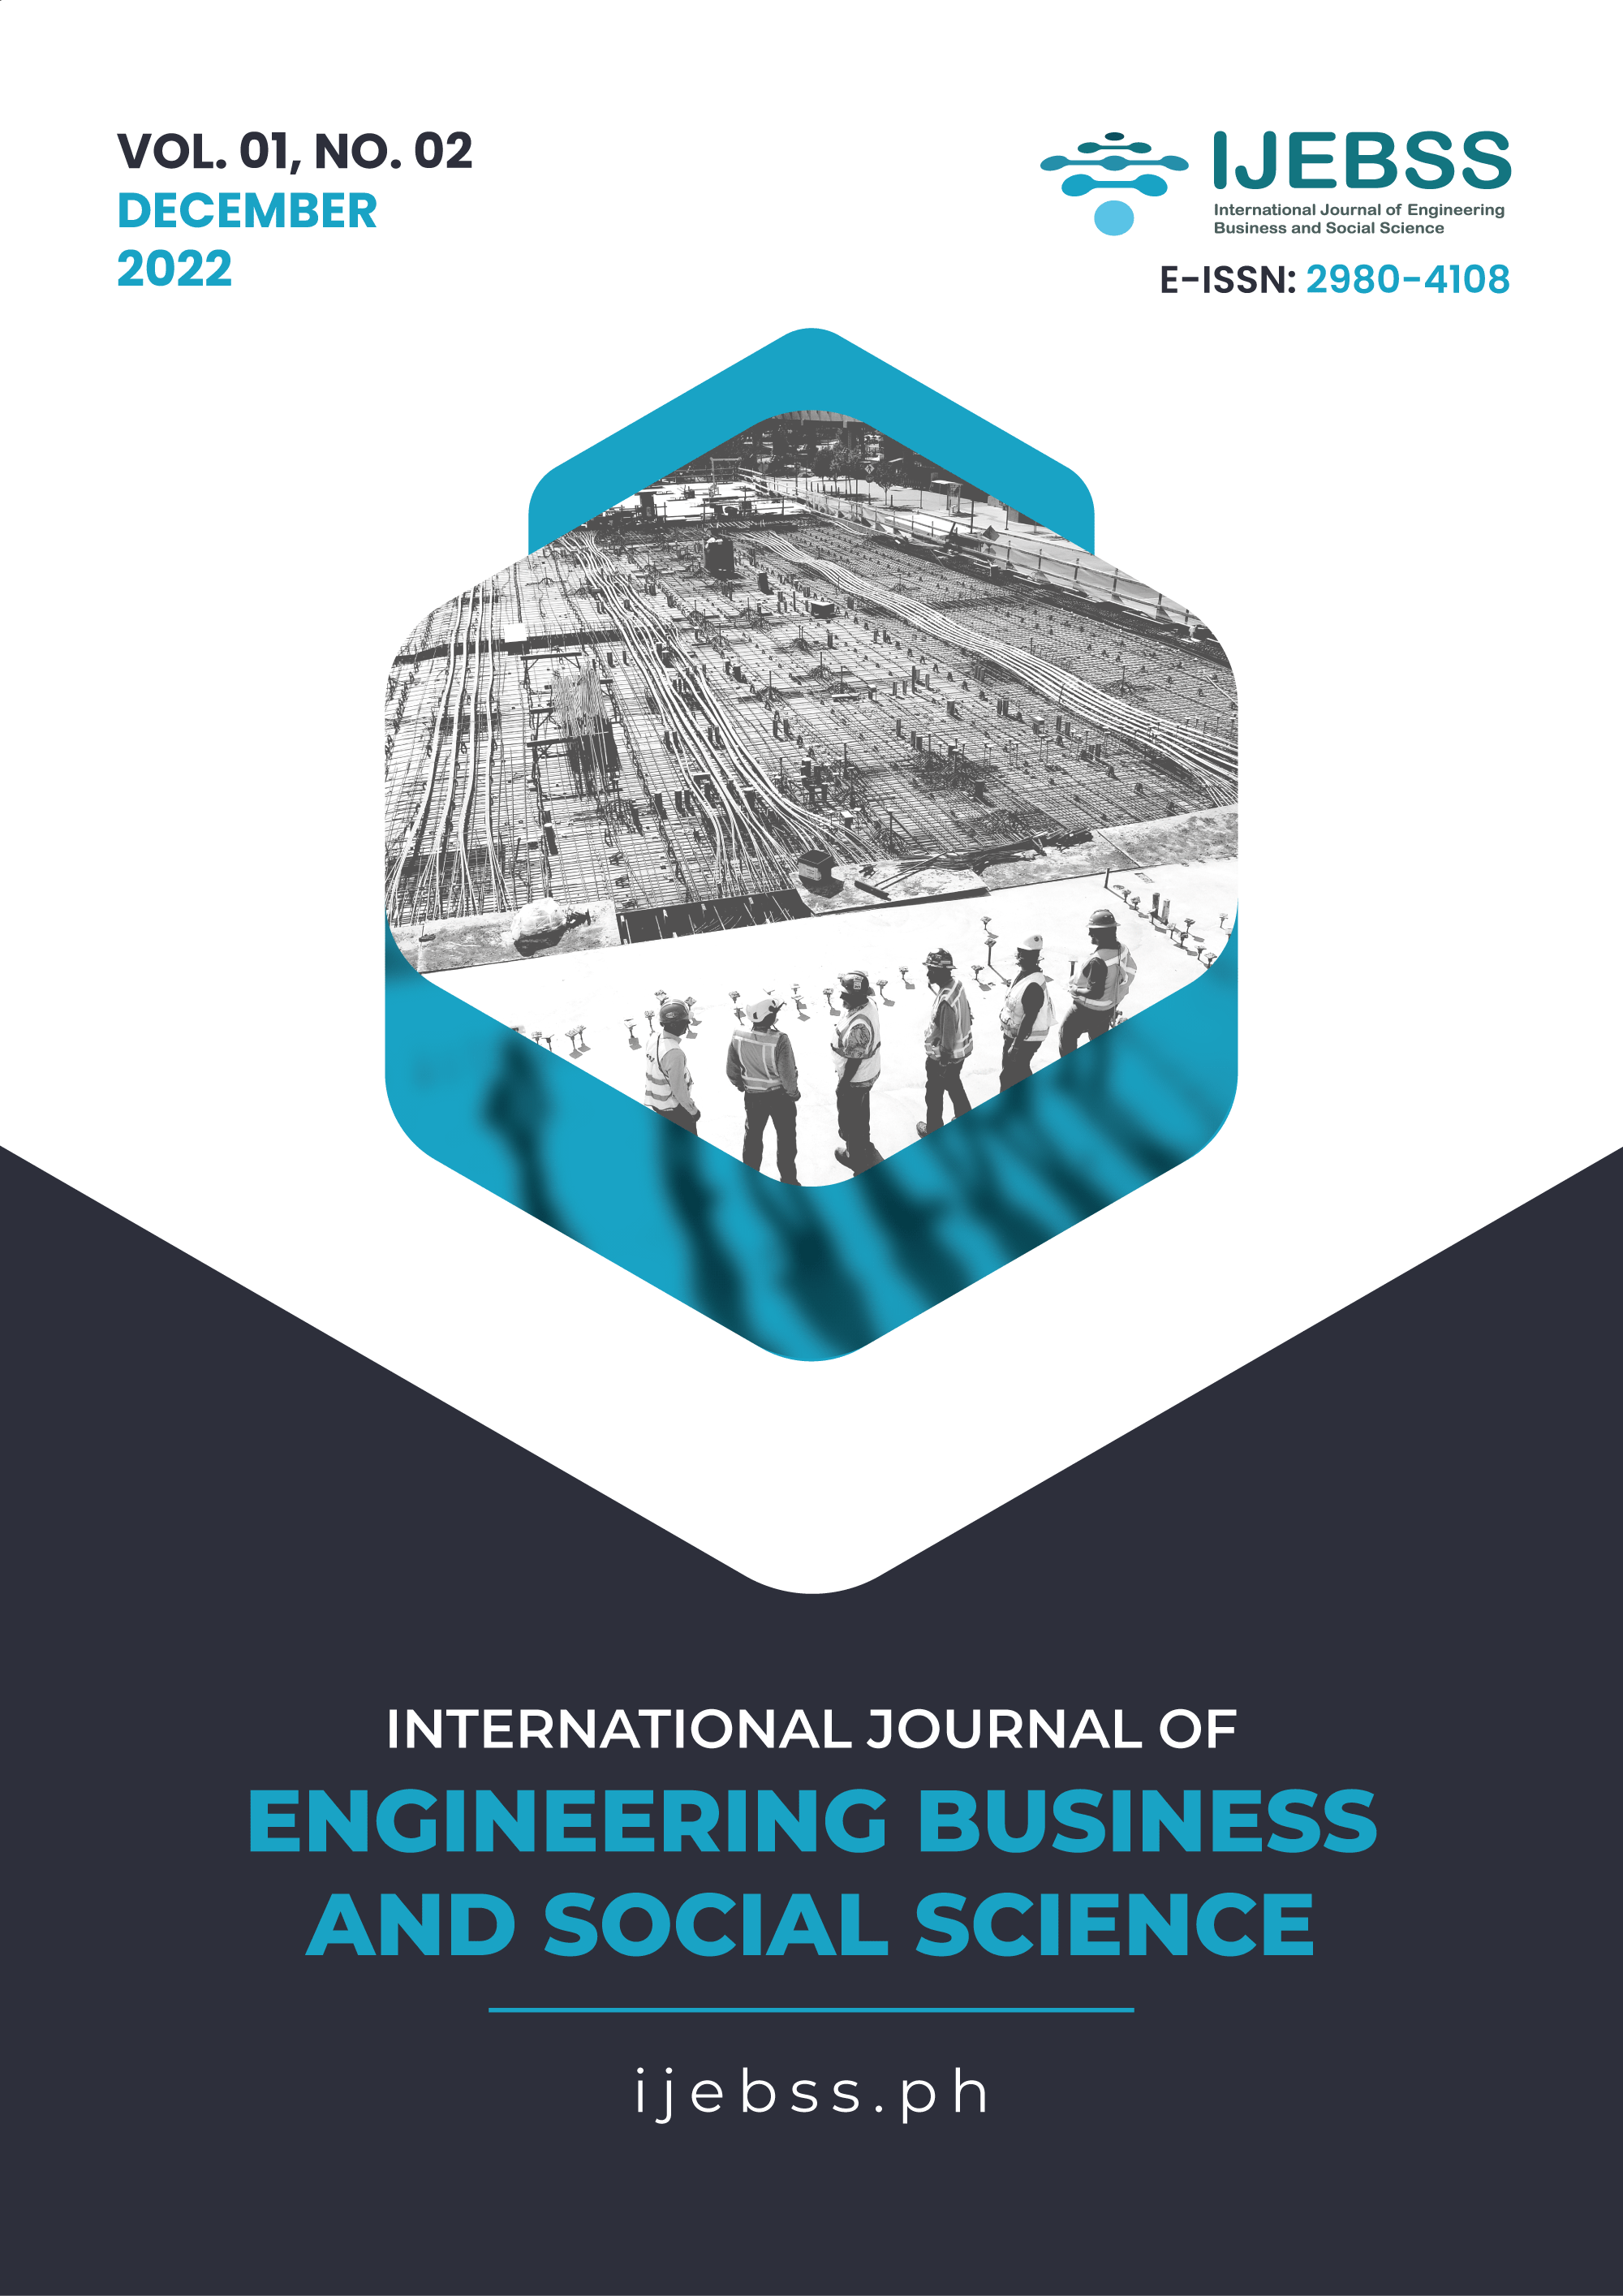 					View Vol. 1 No. 02 (2022): International Journal of Engineering Business and Social Science
				